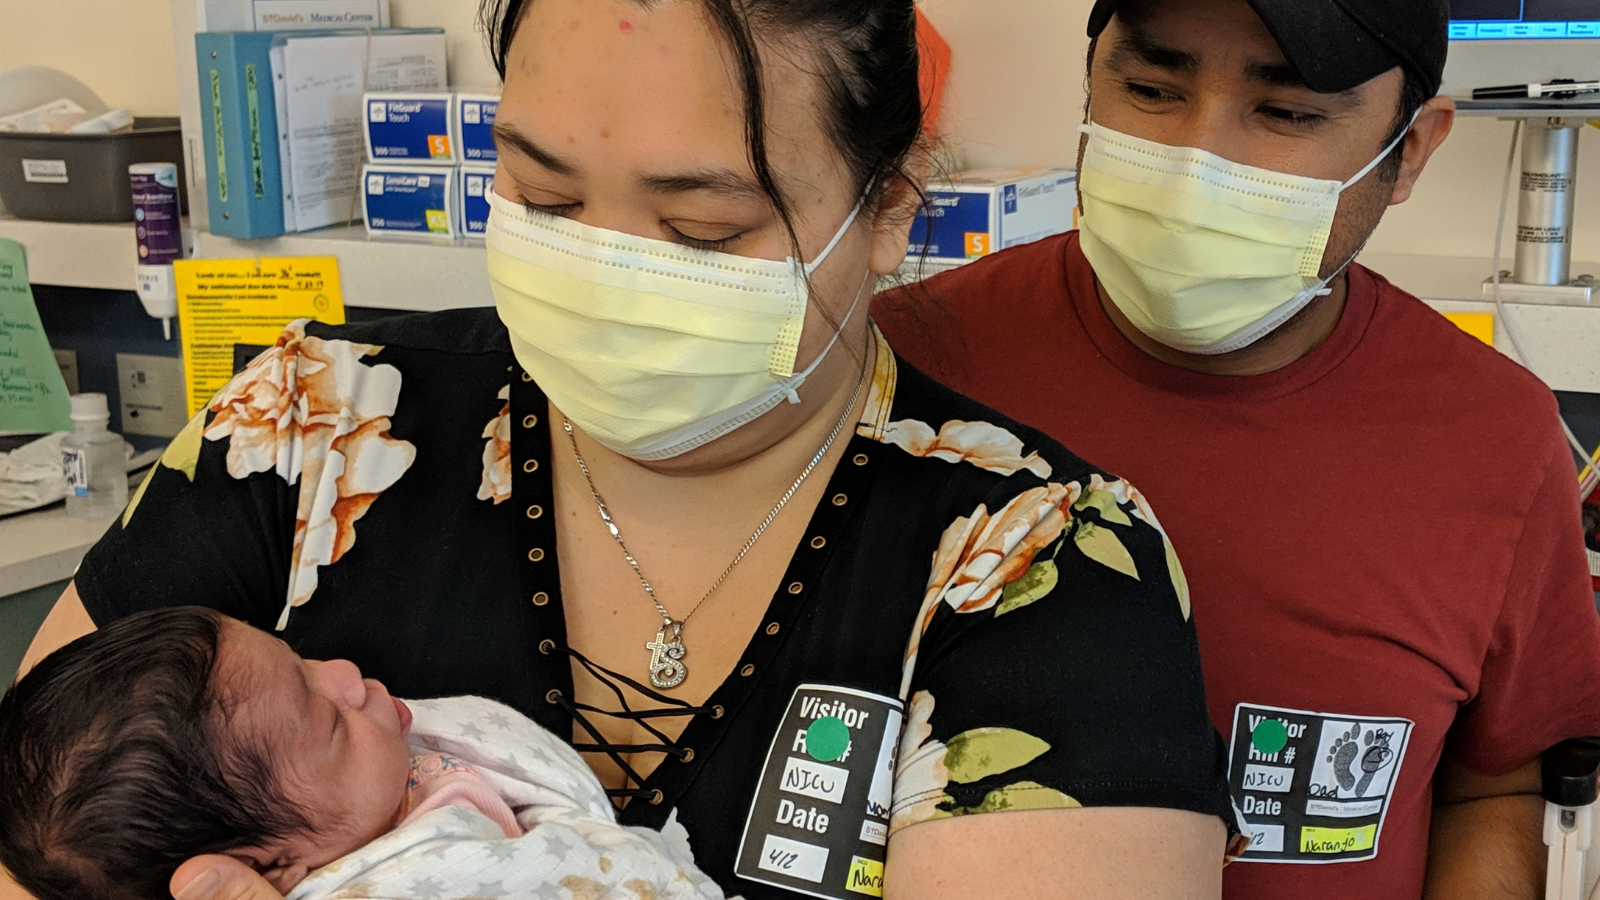 Communicating with your partner, hand to hold nicu basics